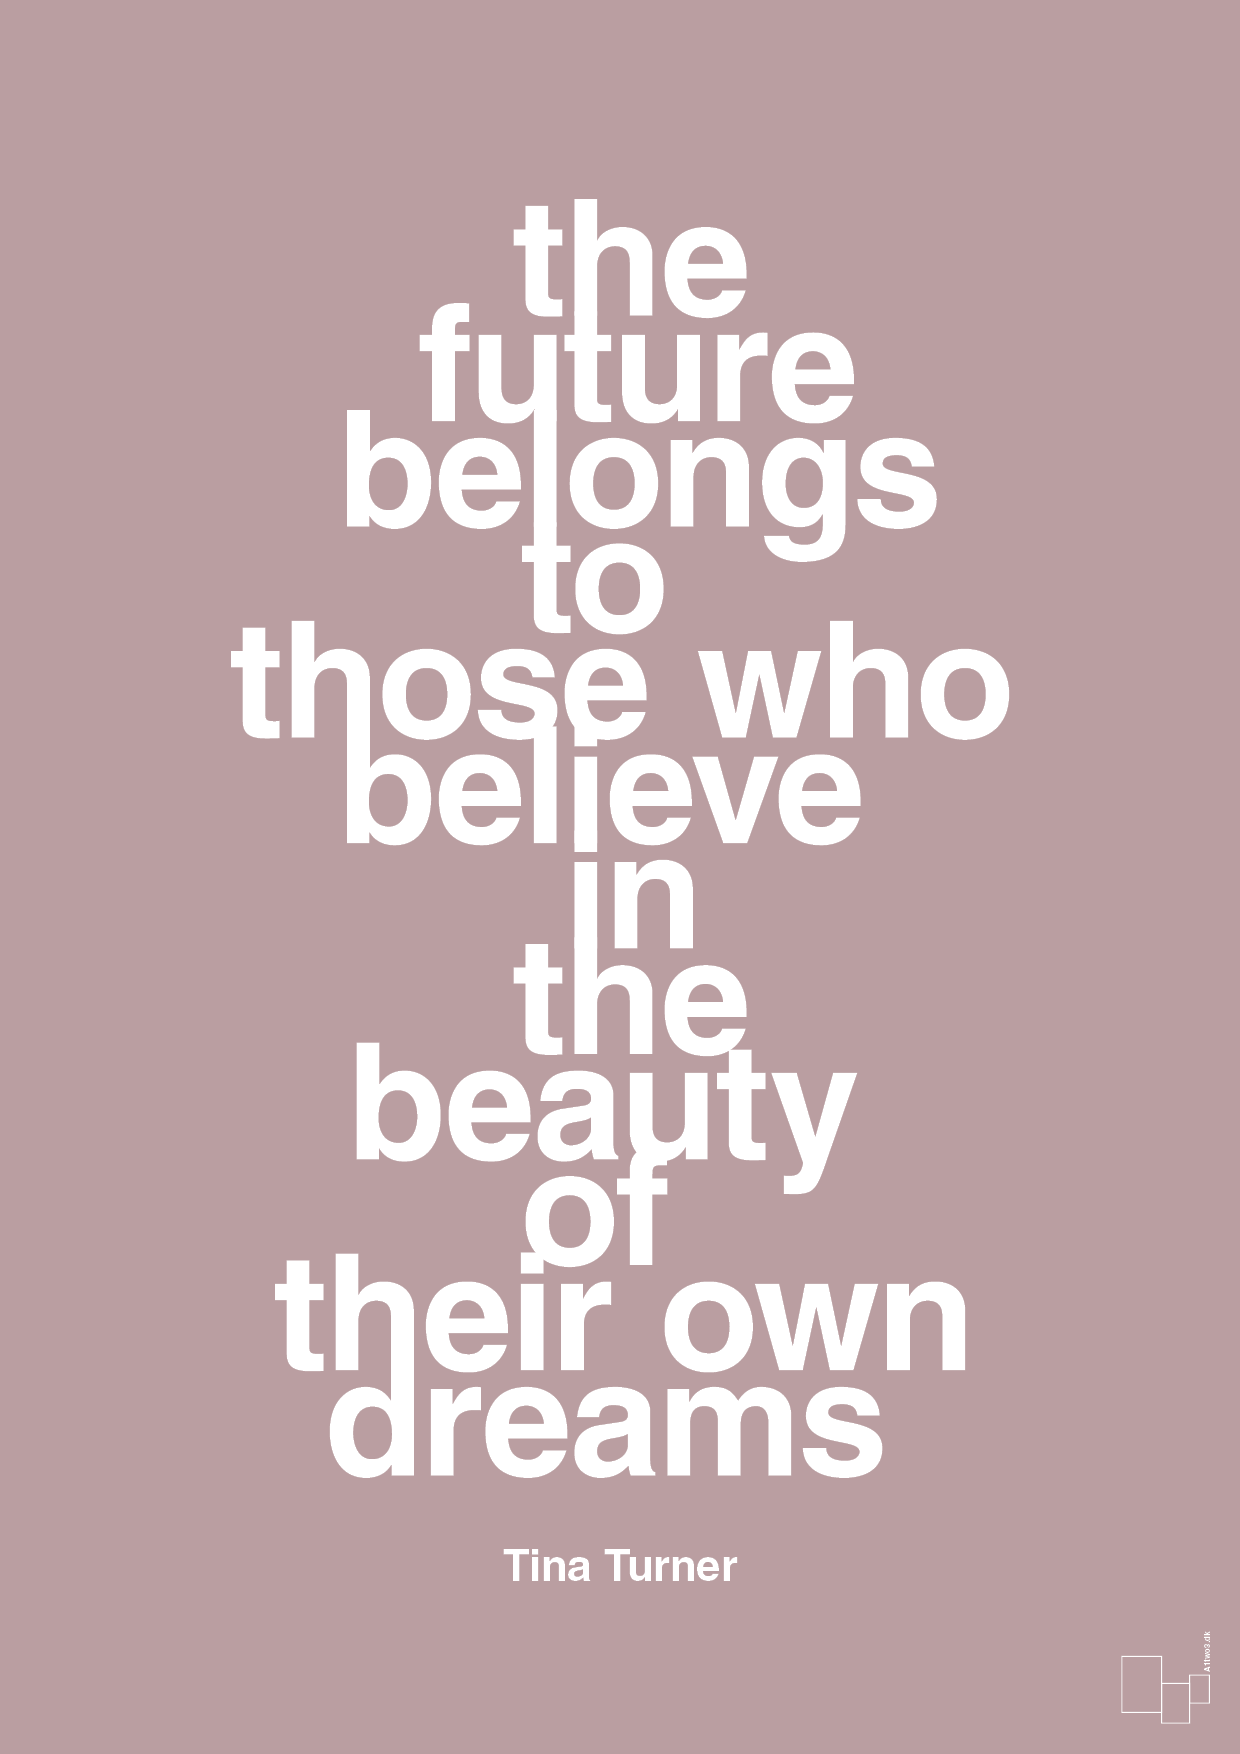 the future belongs to those who believe in the beauty of their own dreams - Plakat med Citater i Light Rose